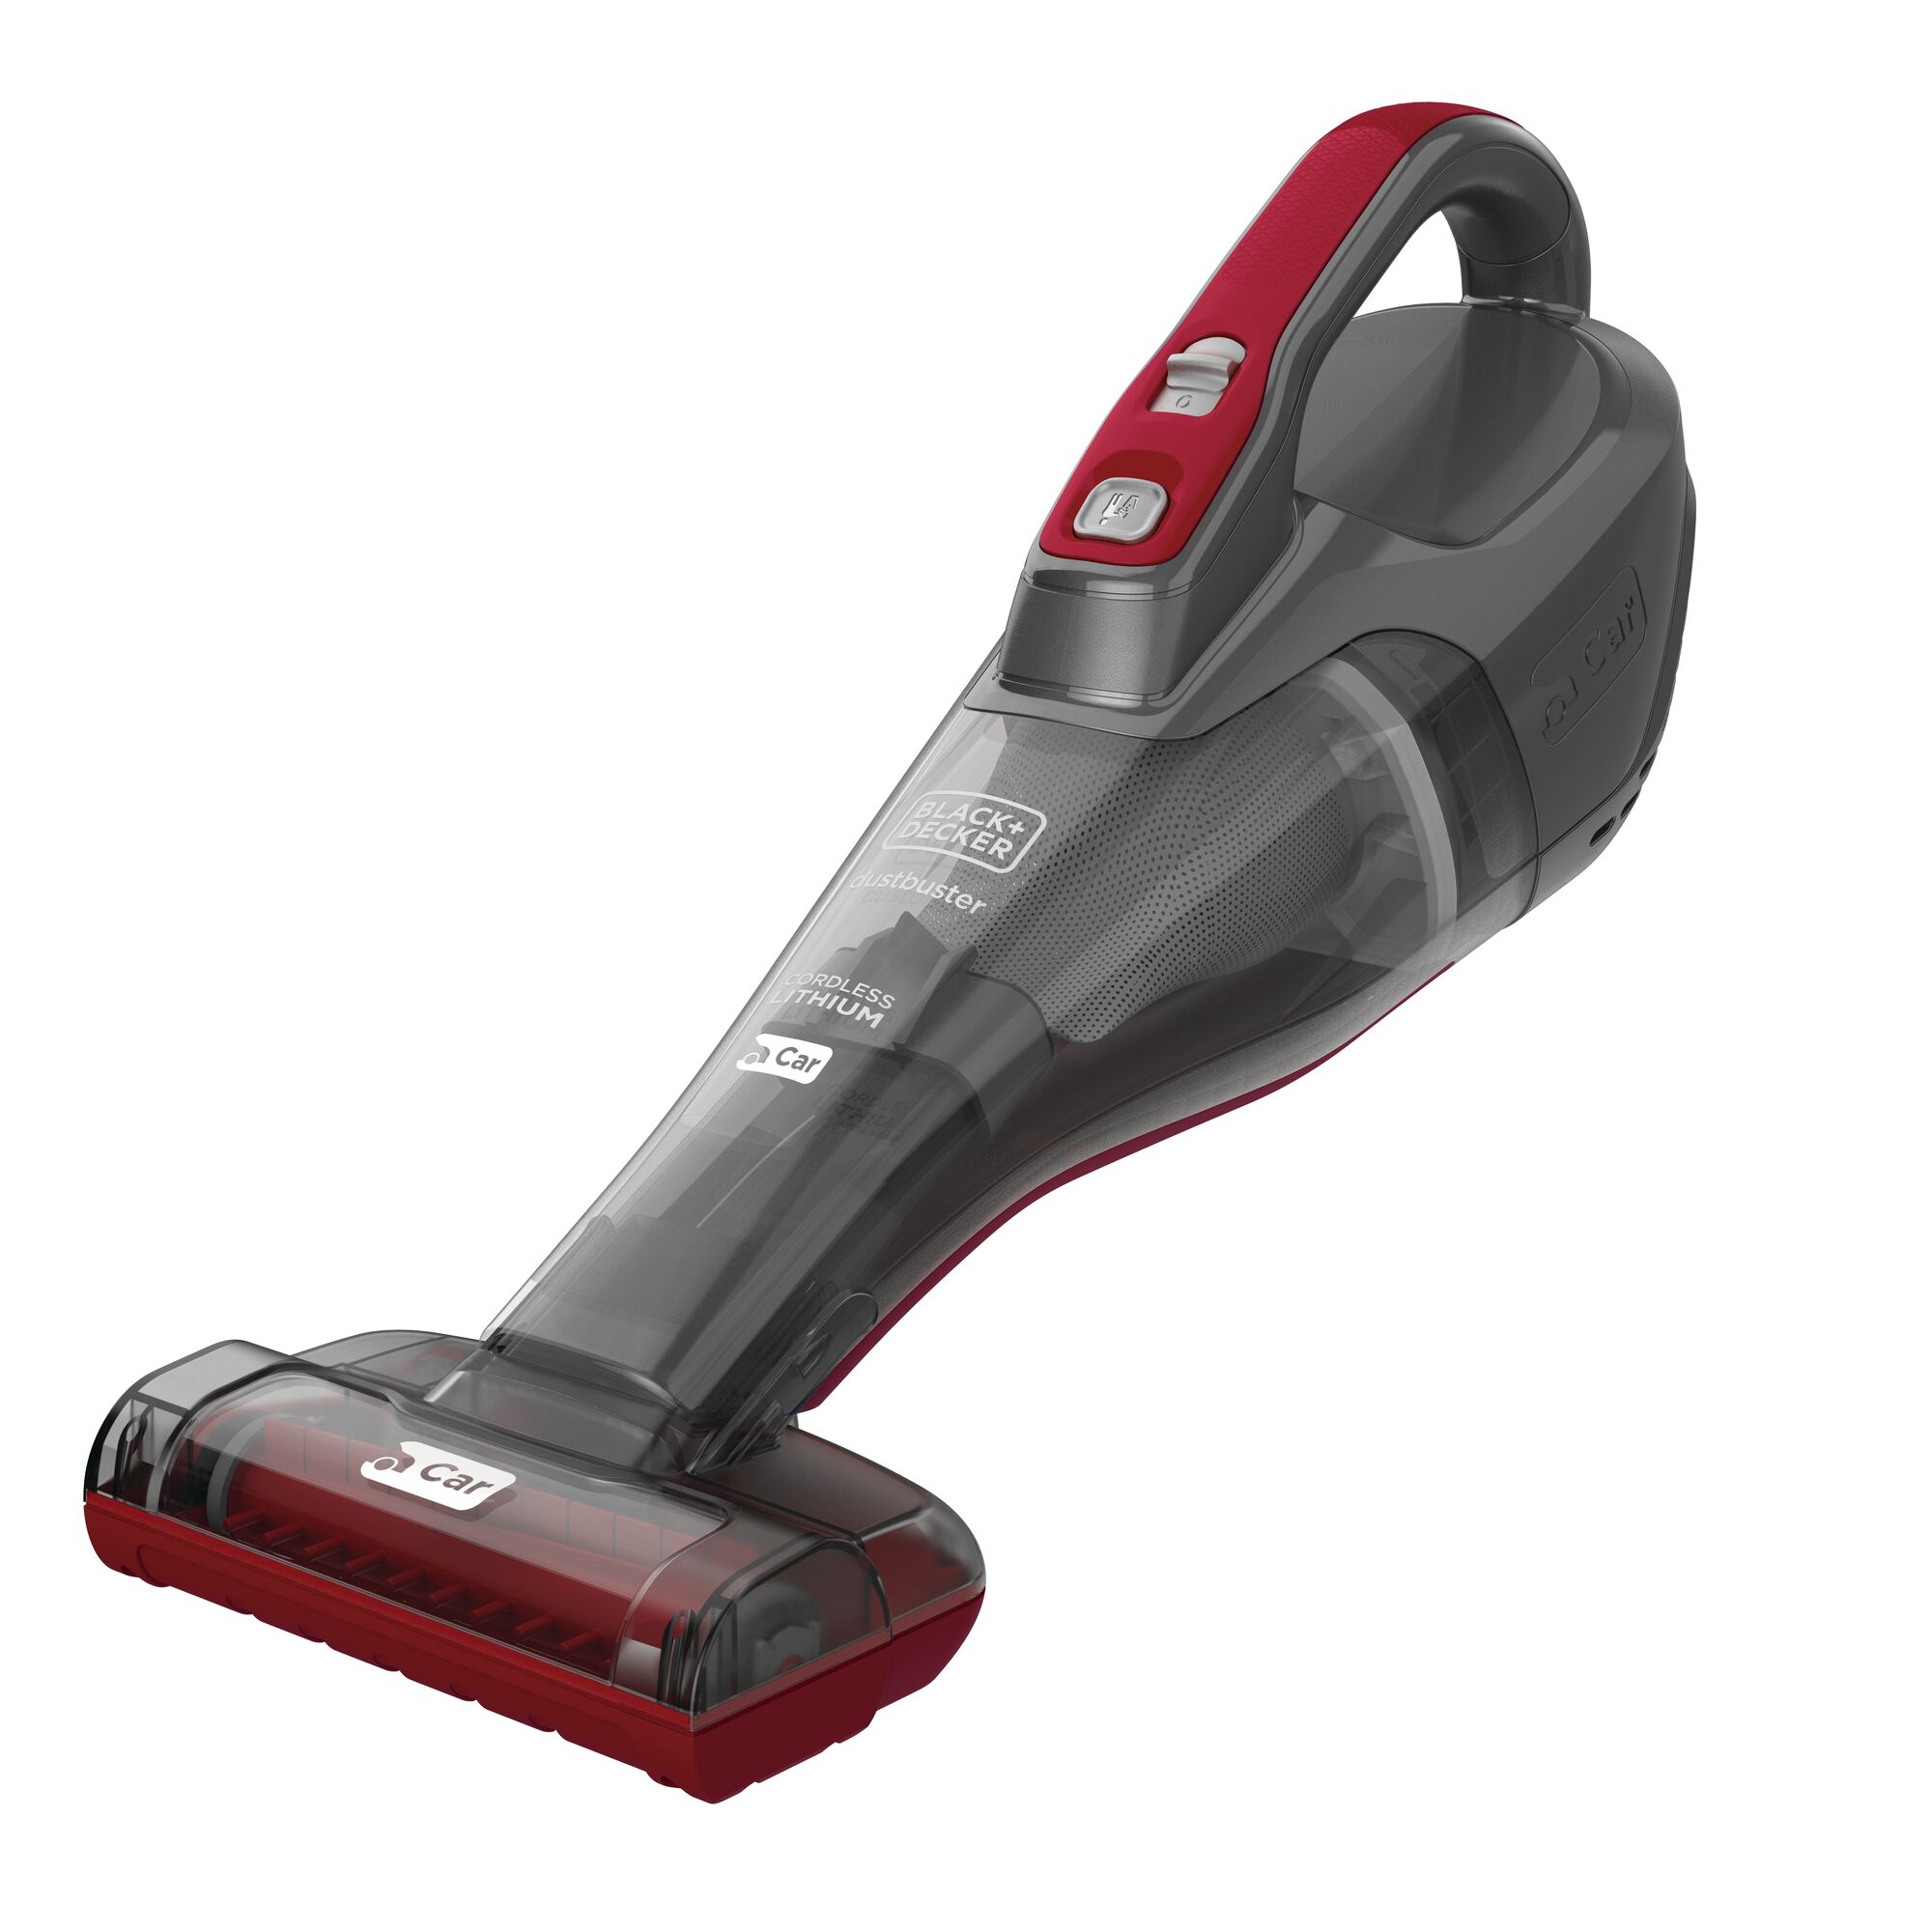 Profile of Dustbuster Quick Clean Car Cordless Hand Vacuum With Motorized Upholstery Brush.